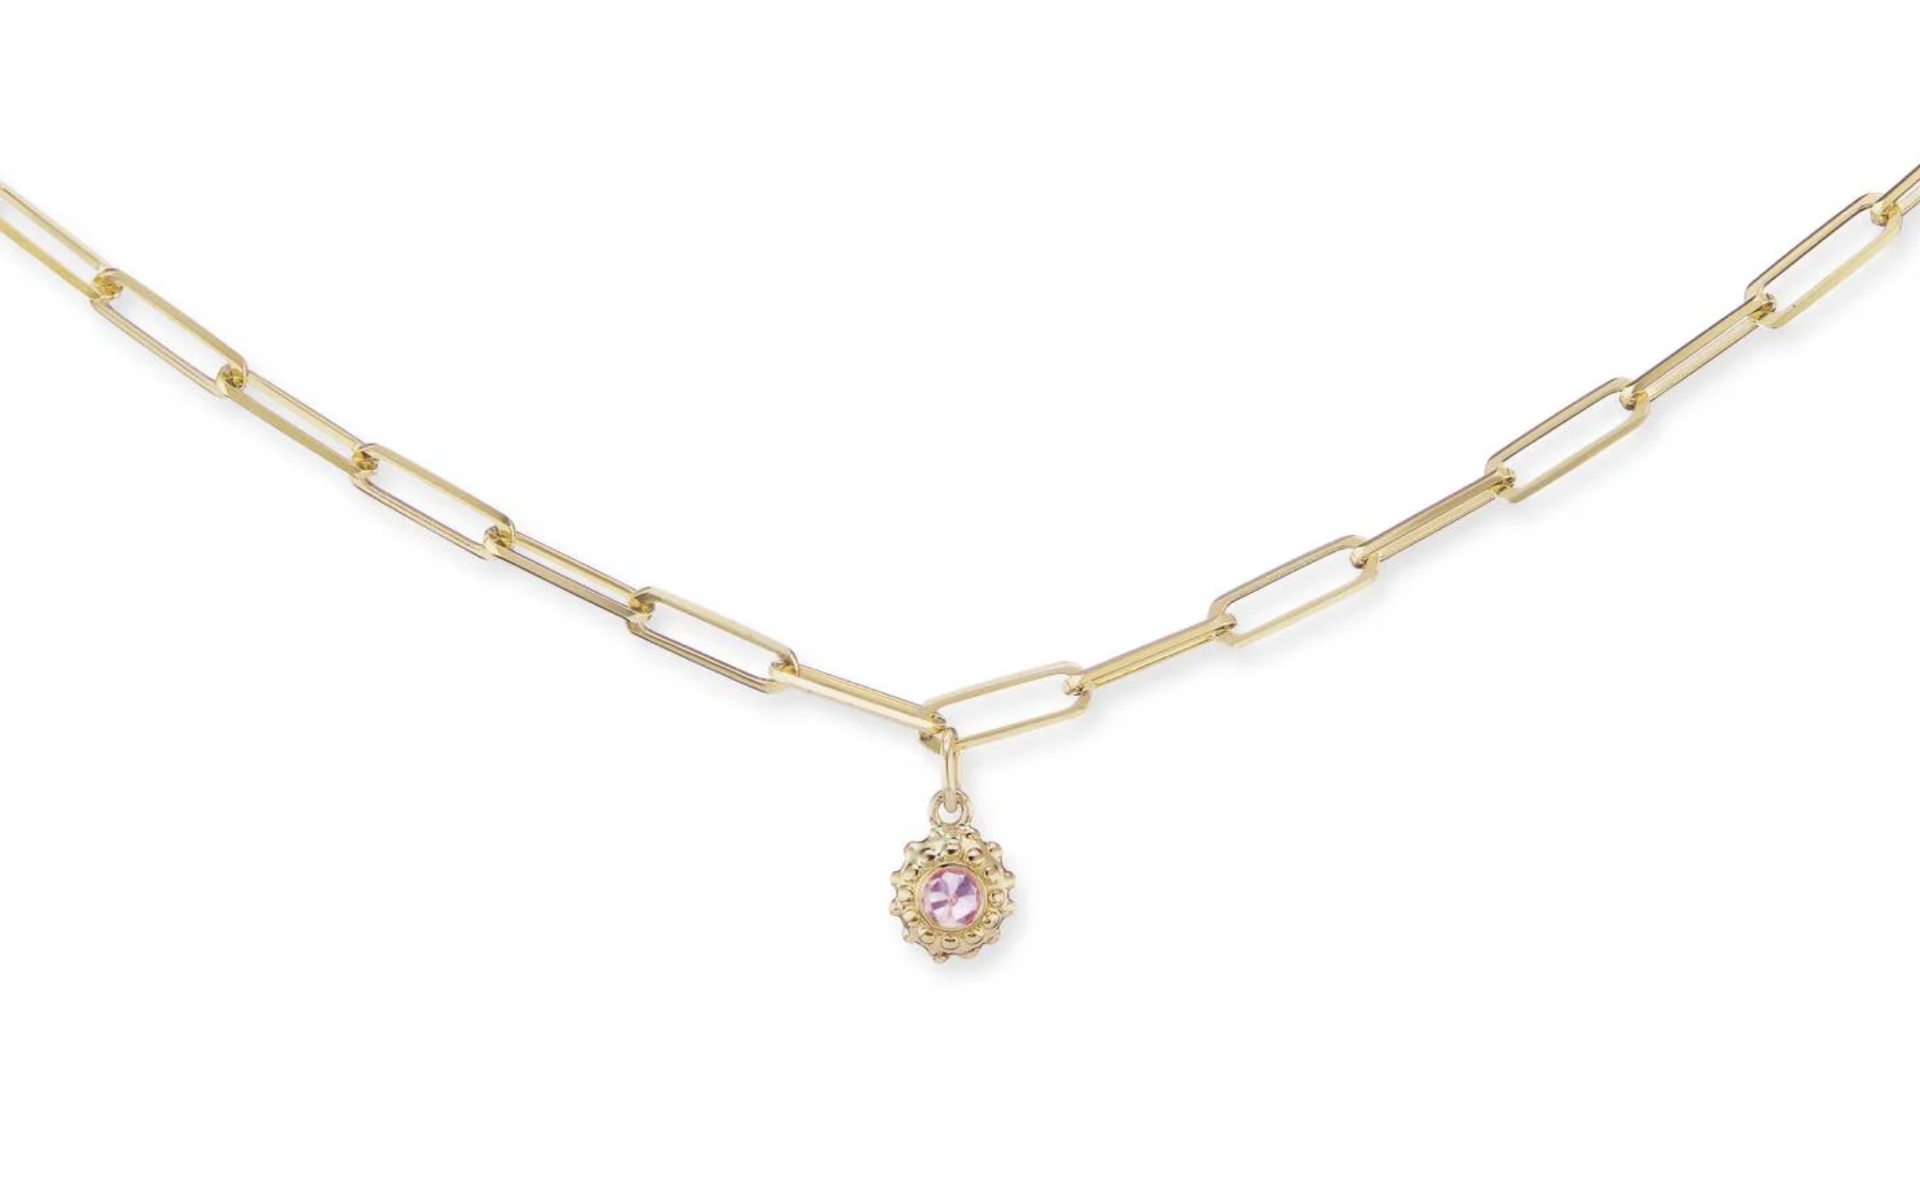 California Dreaming Pink Sapphire Necklace by Ana Katarina